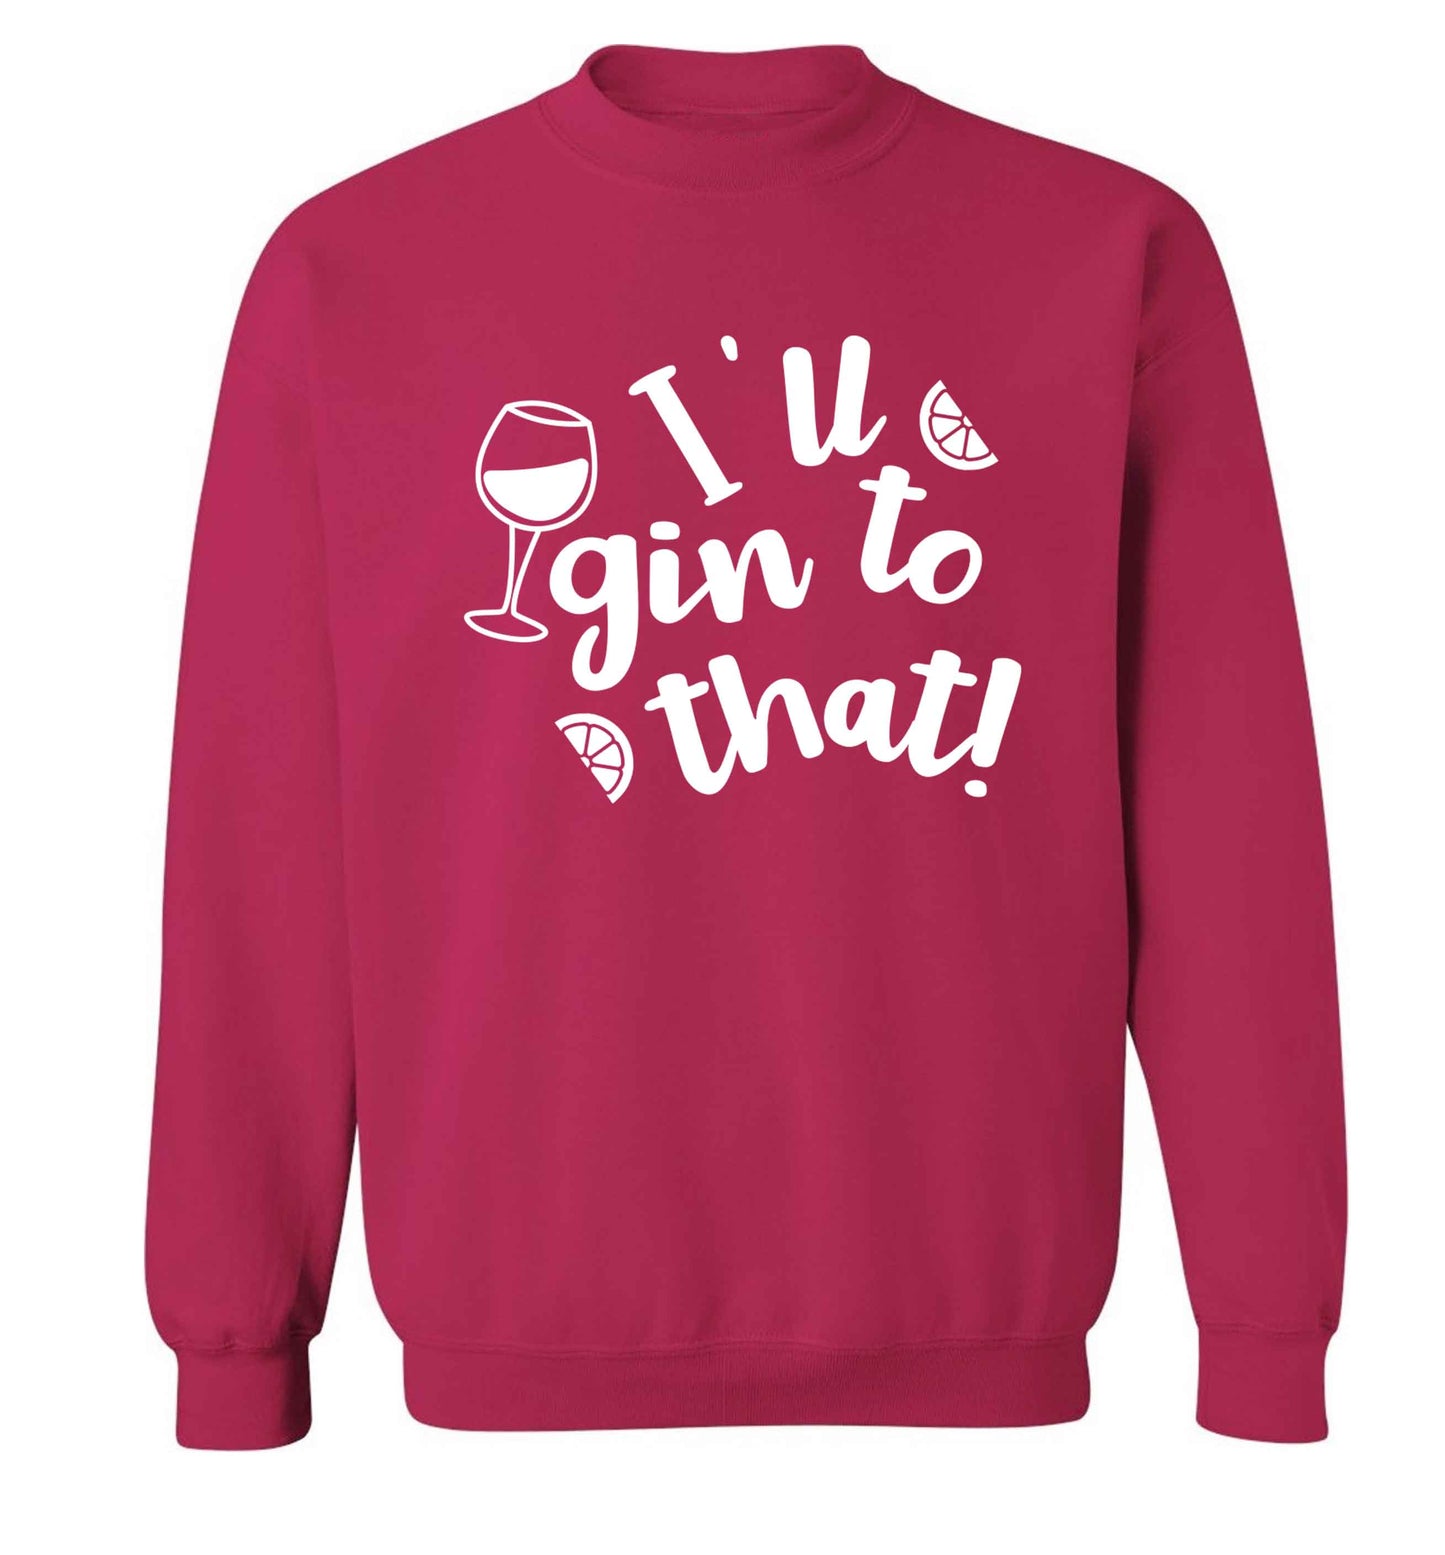 I'll gin to that! Adult's unisex pink Sweater 2XL